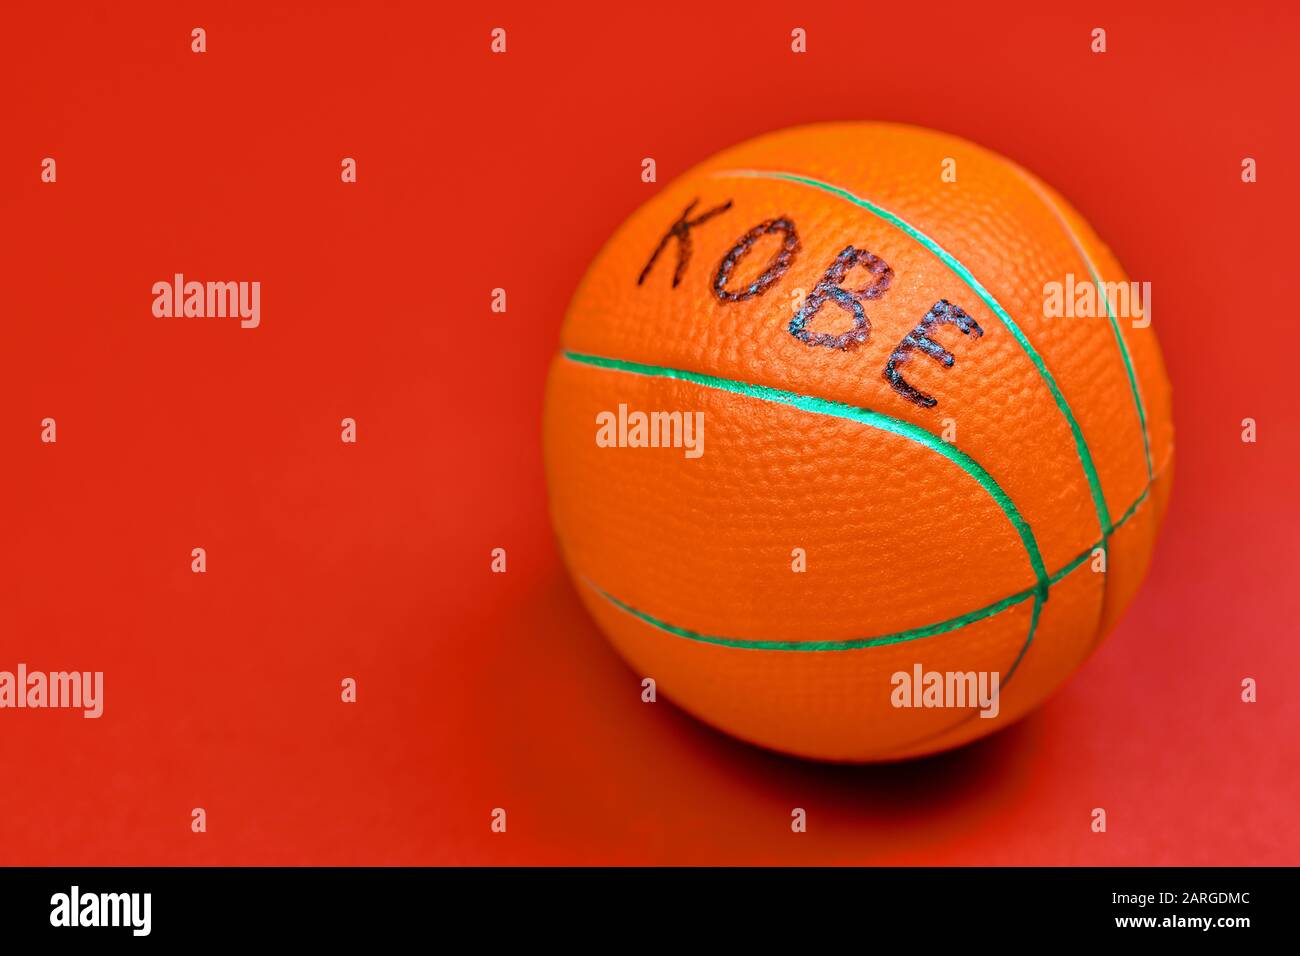 Basketball ball with KOBE text, red background, copy space. Famous basketball player concept. Stock Photo